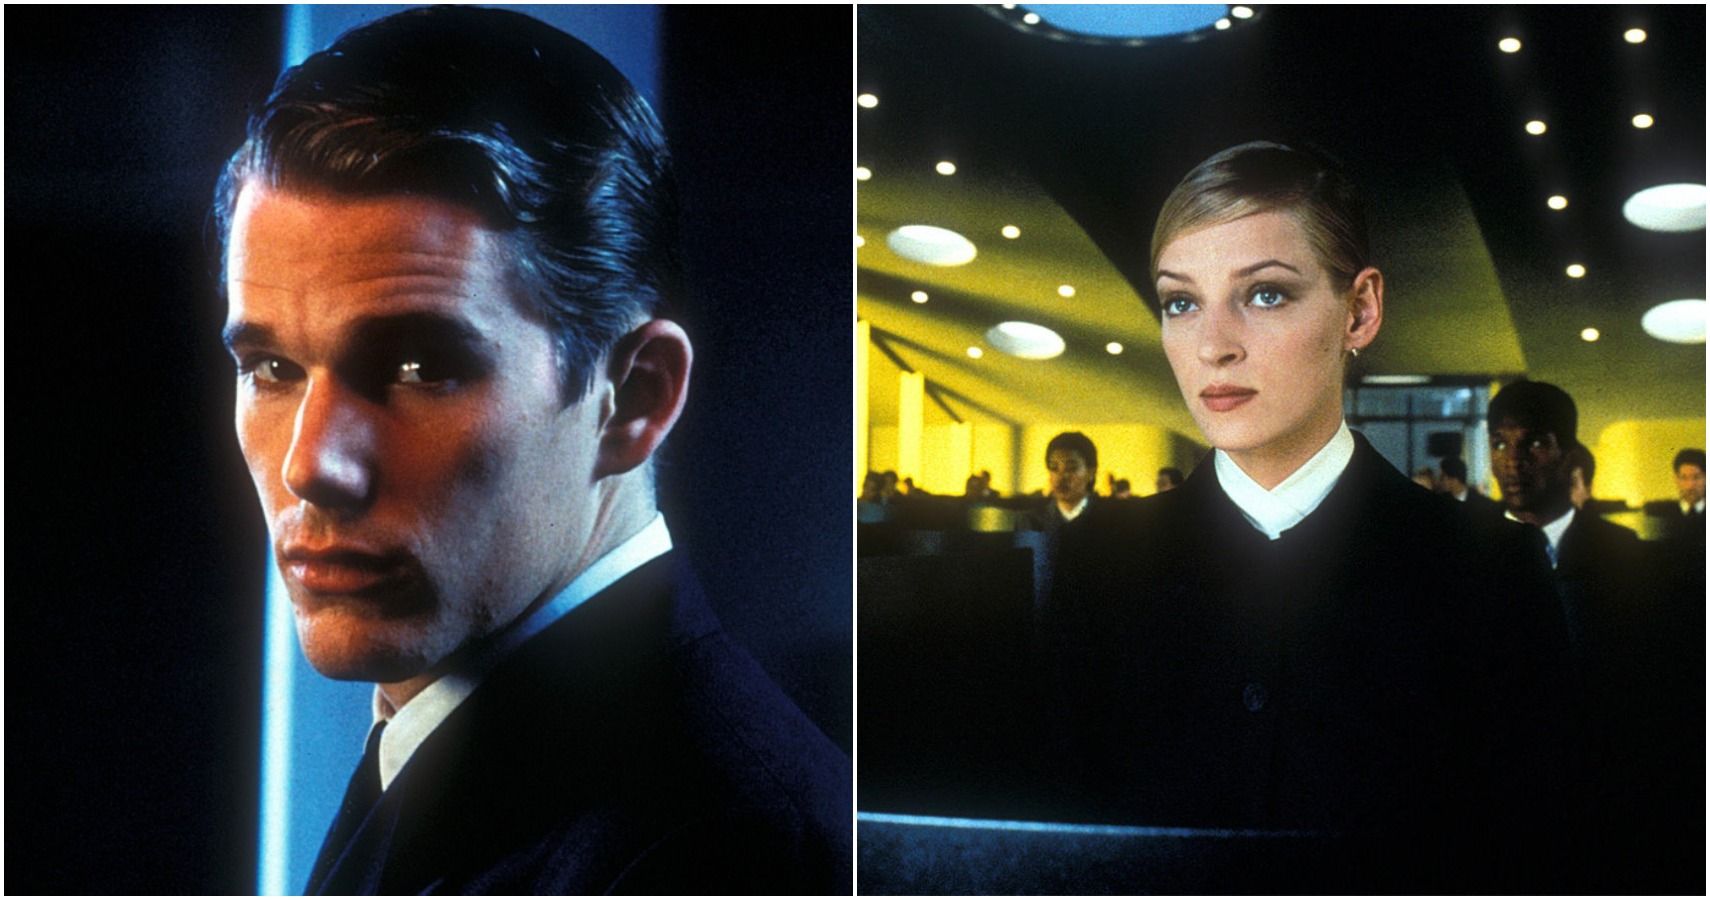 Re-Watching 'Gattaca' at the Dawn of the Age of CRISPR and Genetic Editing